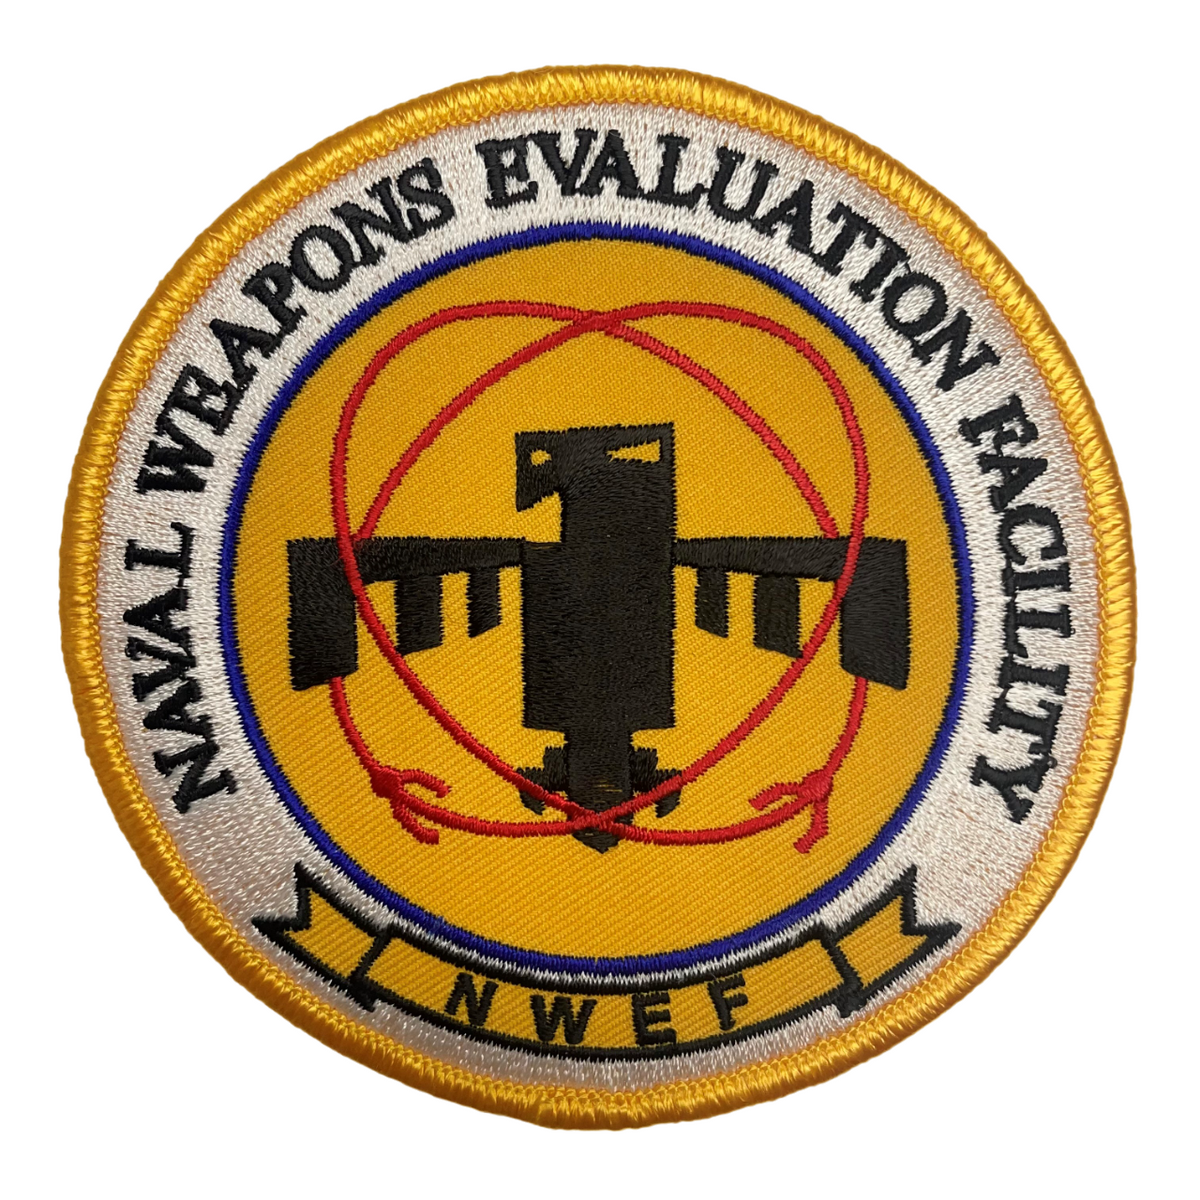 USMC Naval Weapons Evaluation Facility - 4 Inch Sew-On Patch